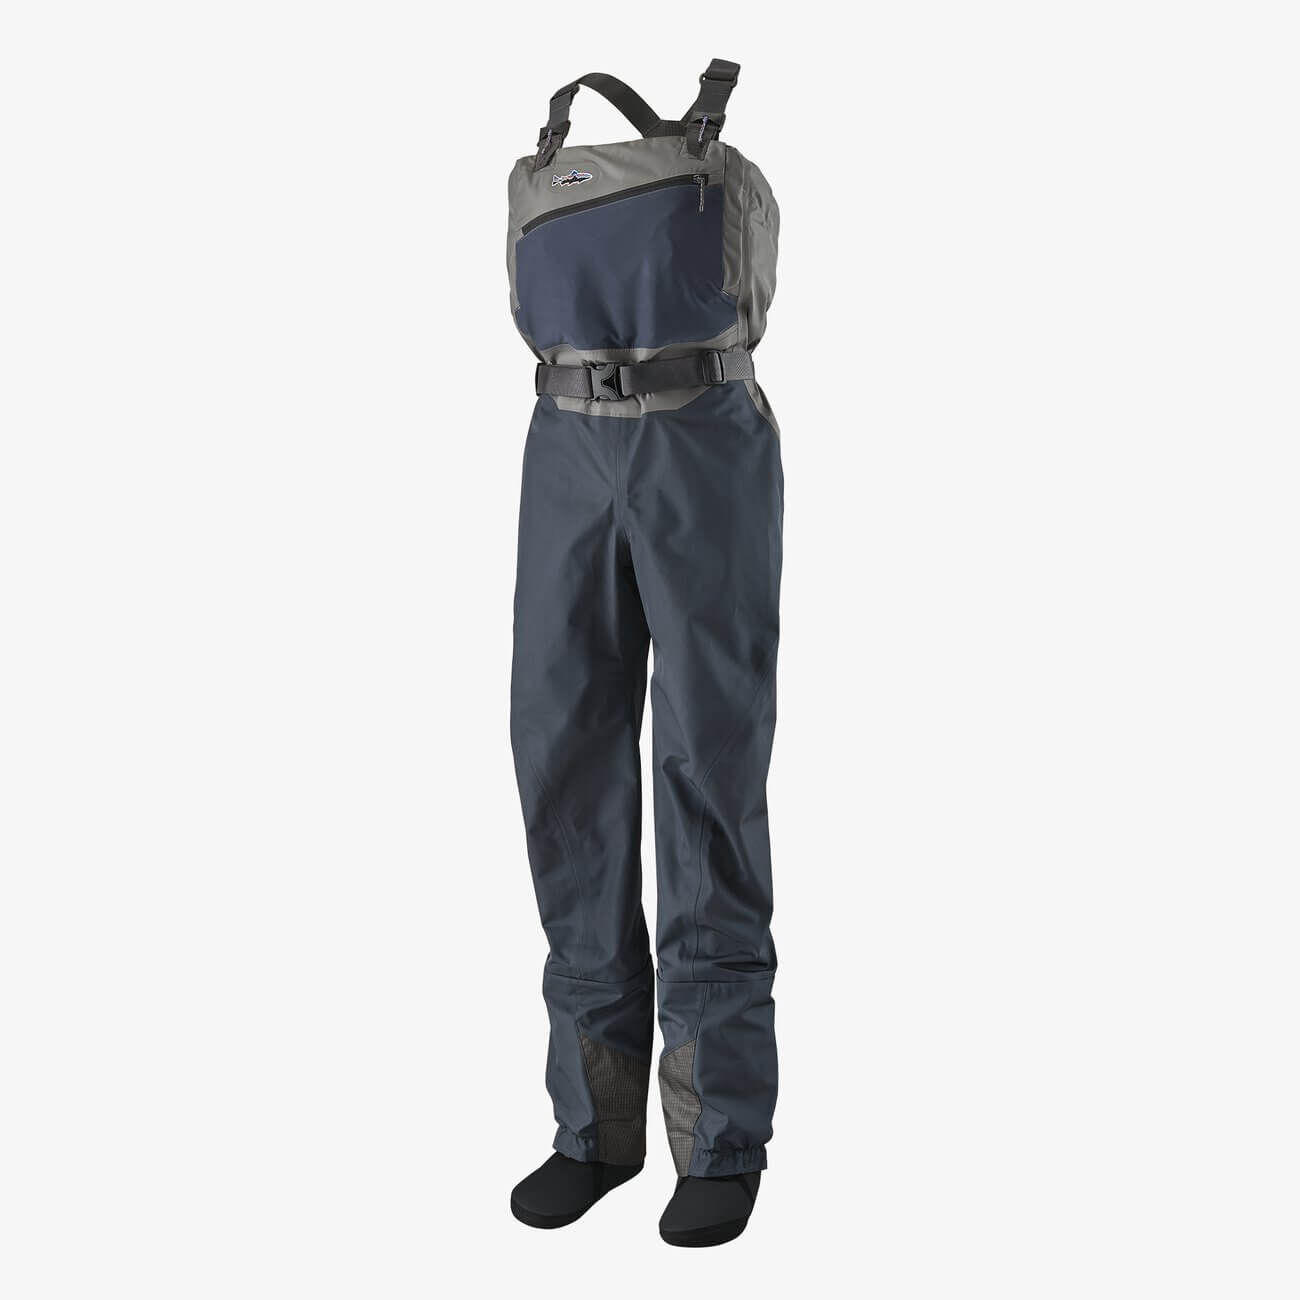 Patagonia Women's Swiftcurrent Waders 2020 - LSS (Large Short)